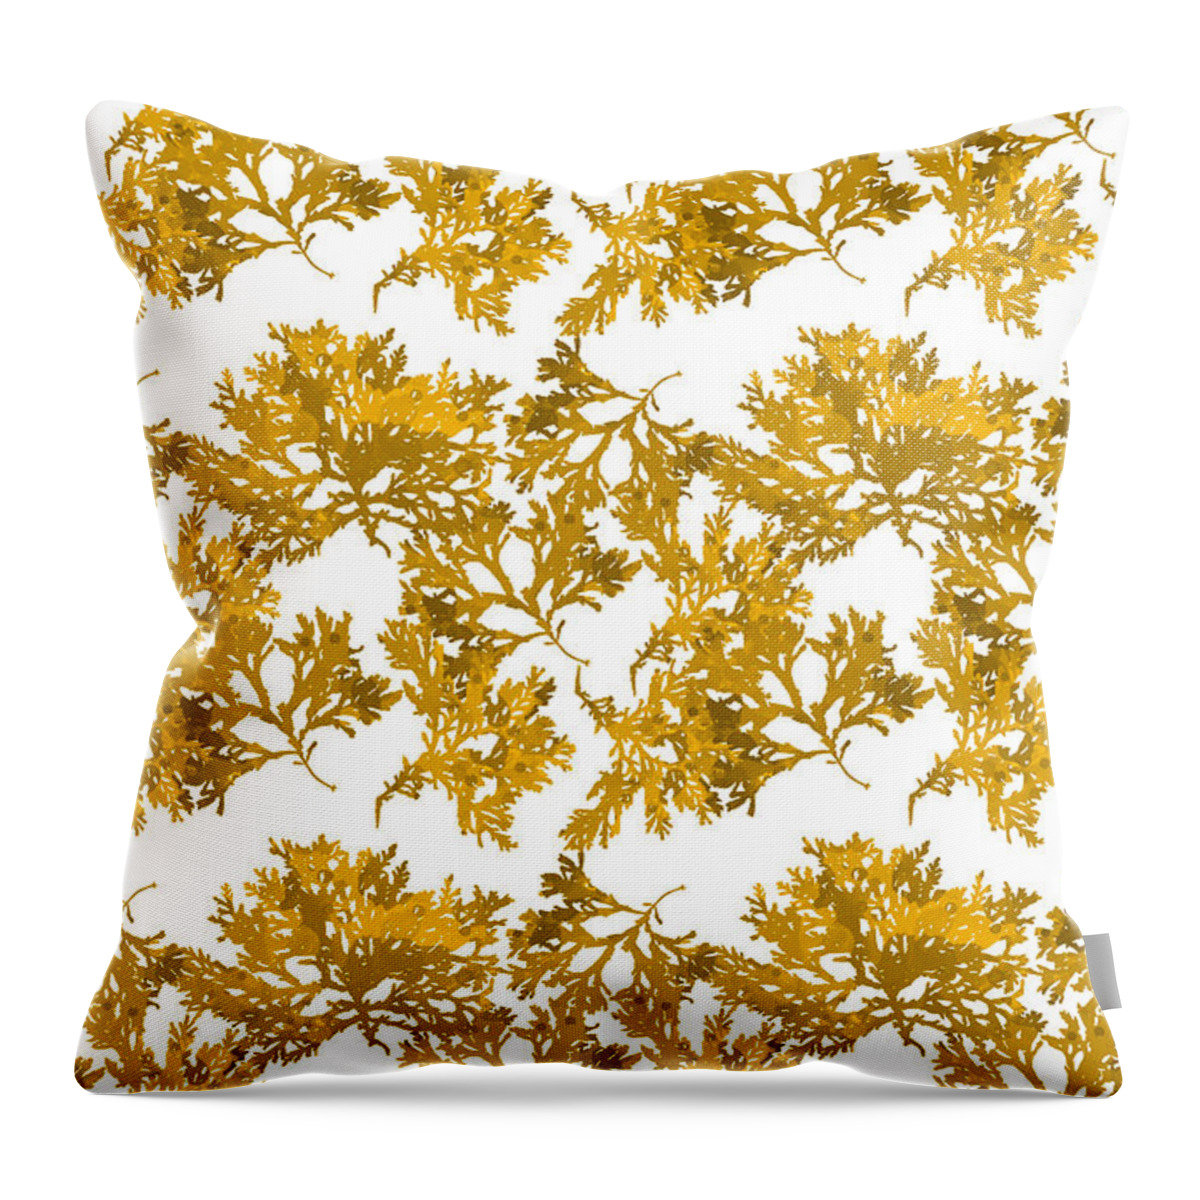 Seaweed Throw Pillow featuring the mixed media Gold Seaweed Art Delesseria Alata by Christina Rollo